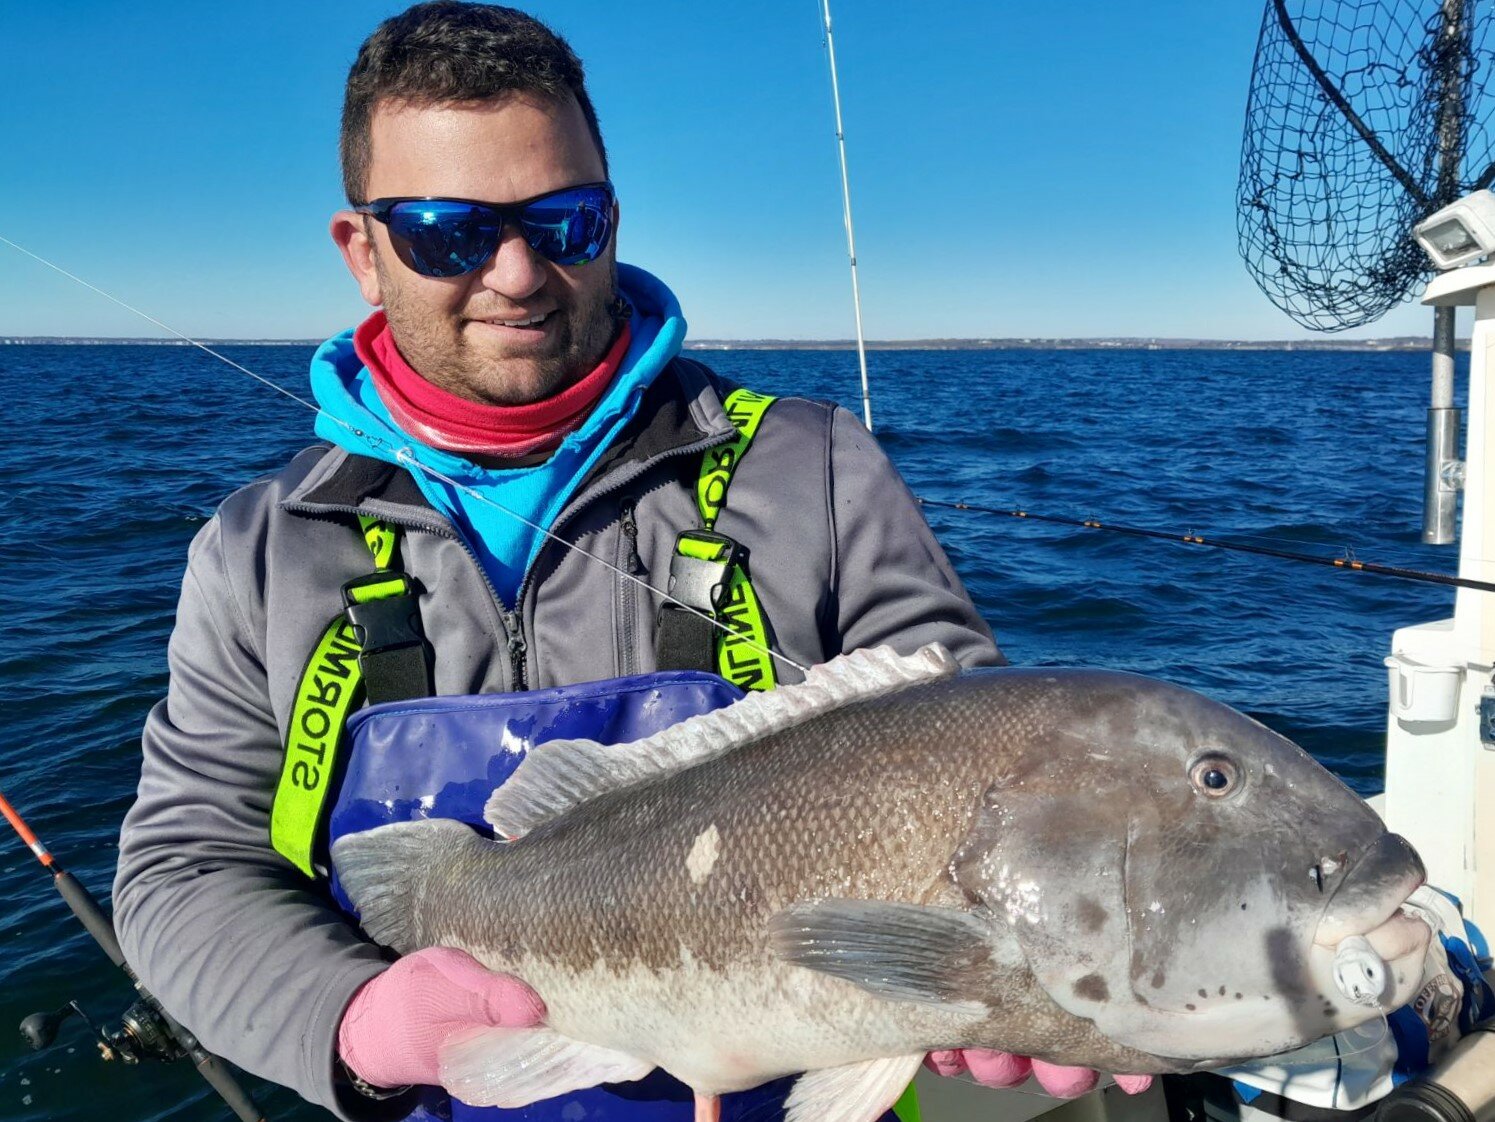 Tautog bite has been outstanding – get out and fish